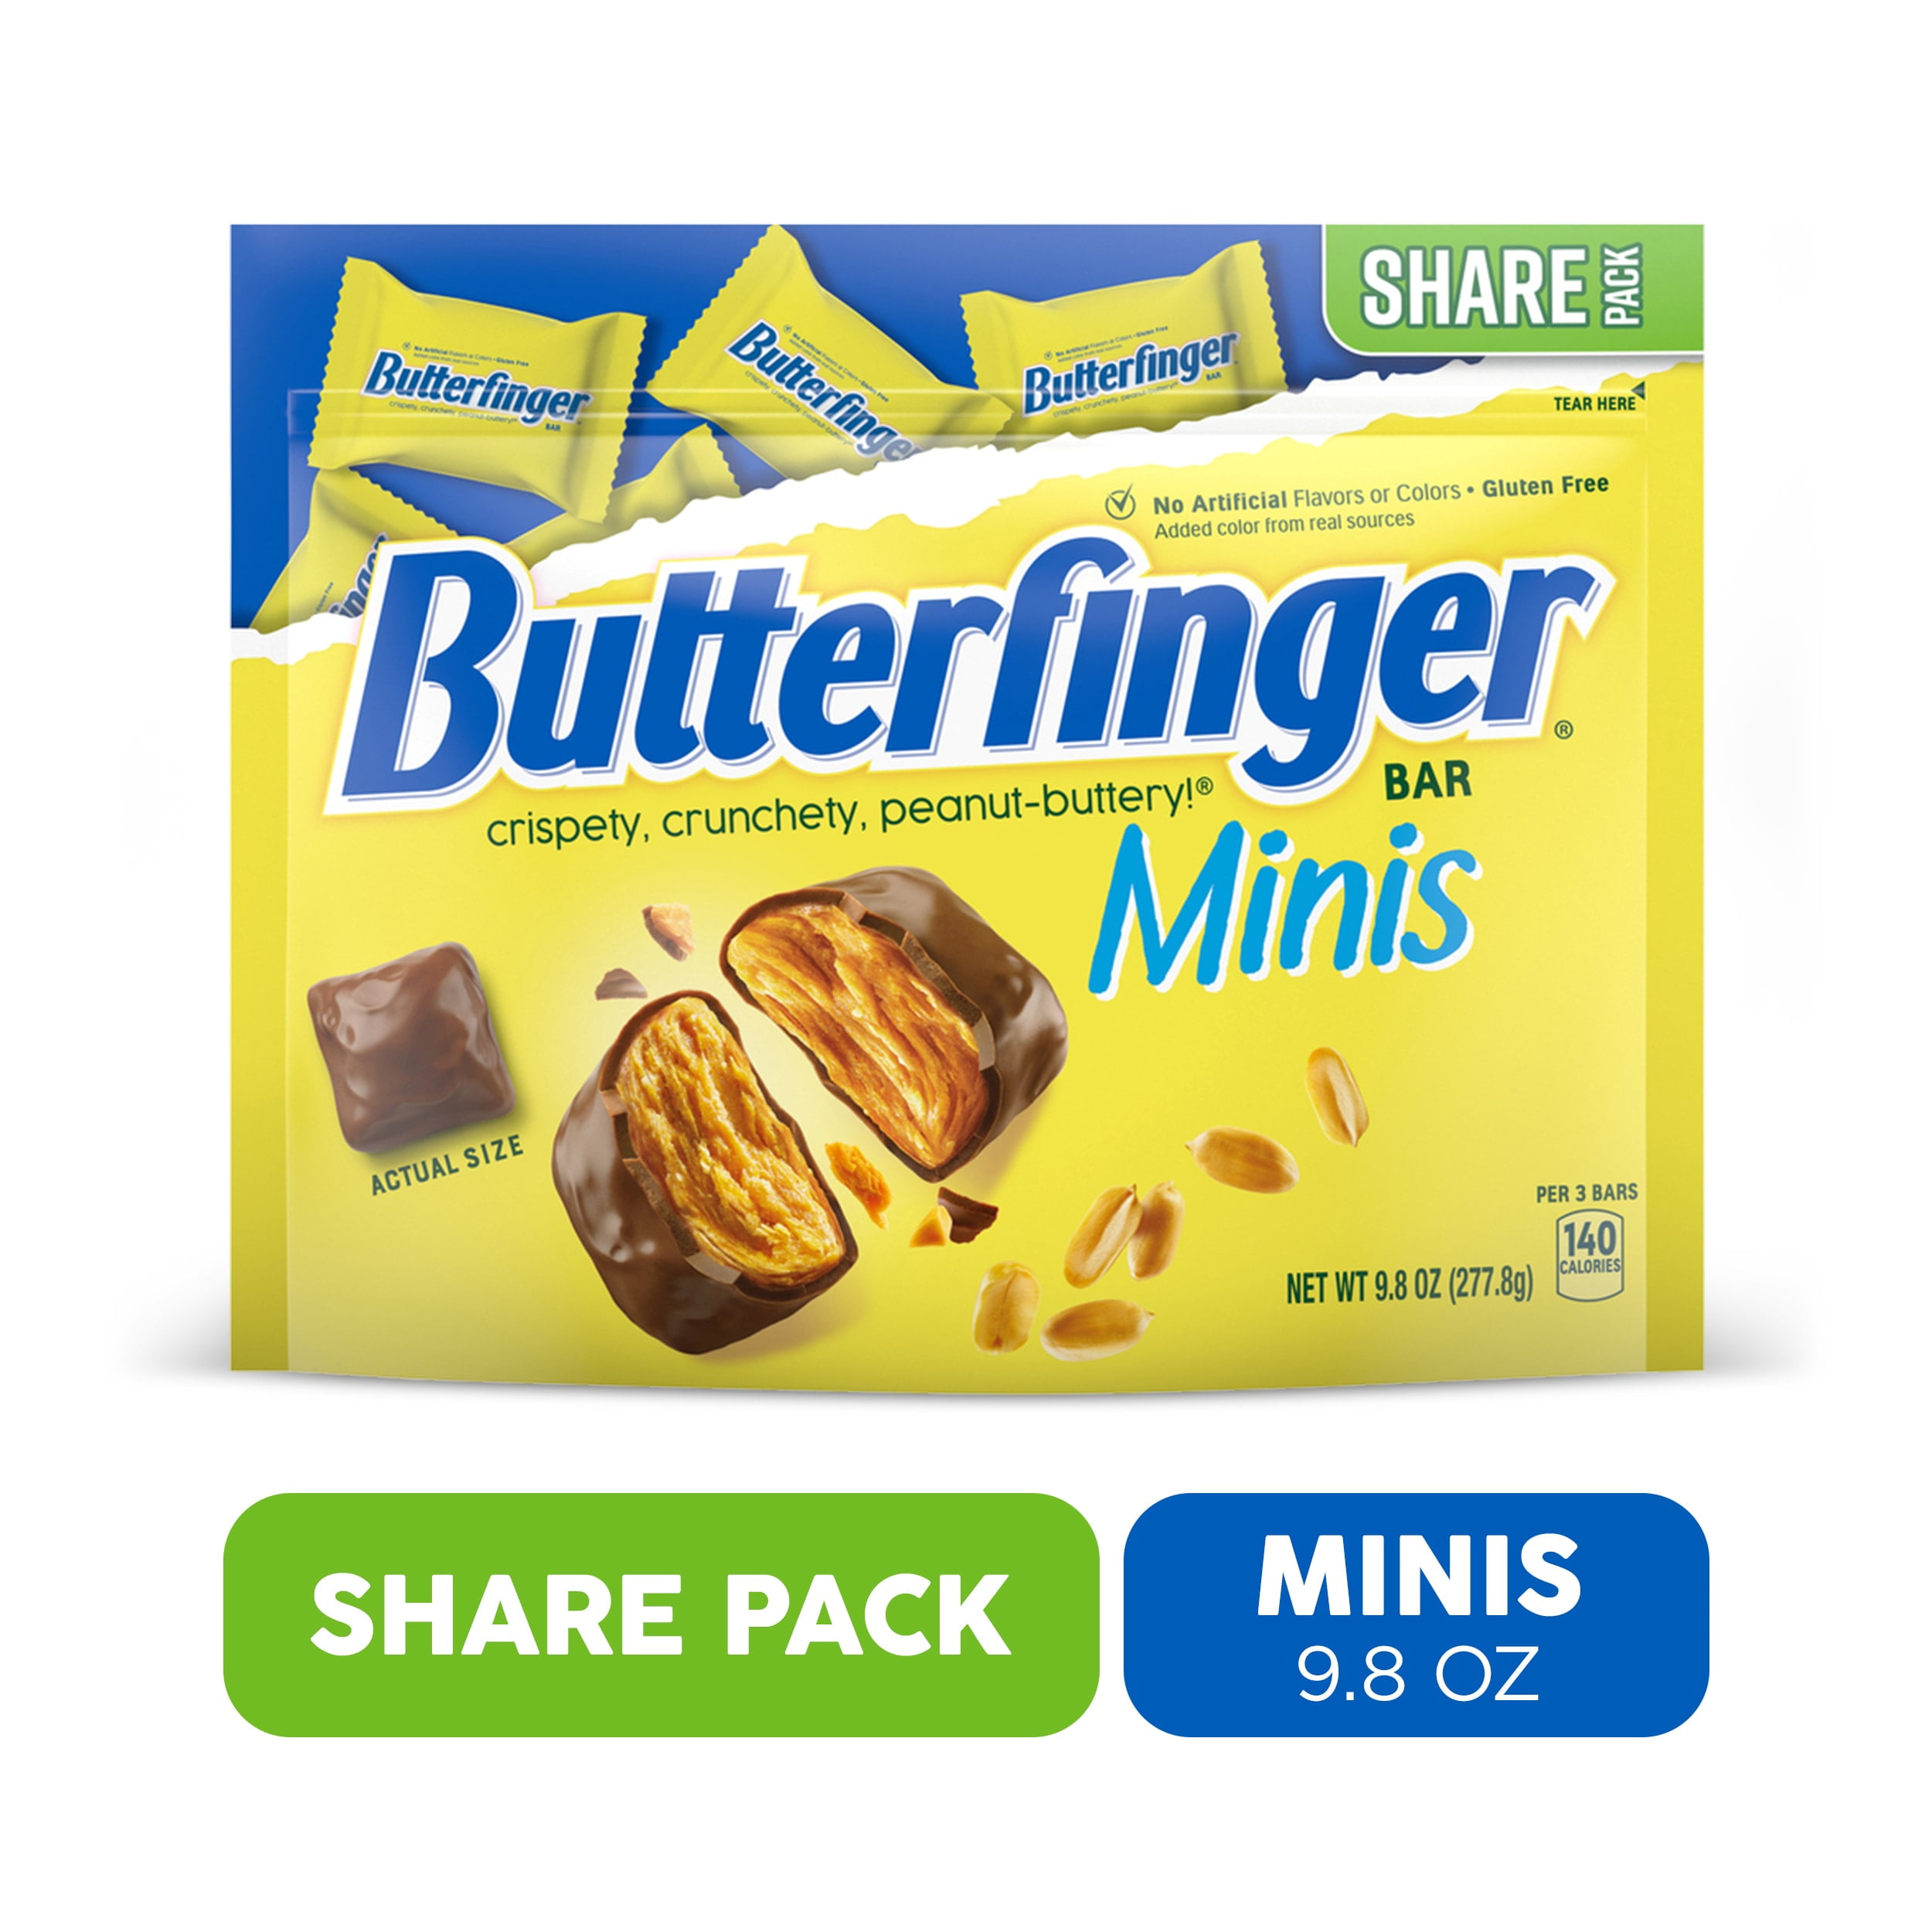 Butterfinger Chocolatey, Peanut-Buttery, Minis Candy Bars, Resealable Share Size Bag, 9.8 oz